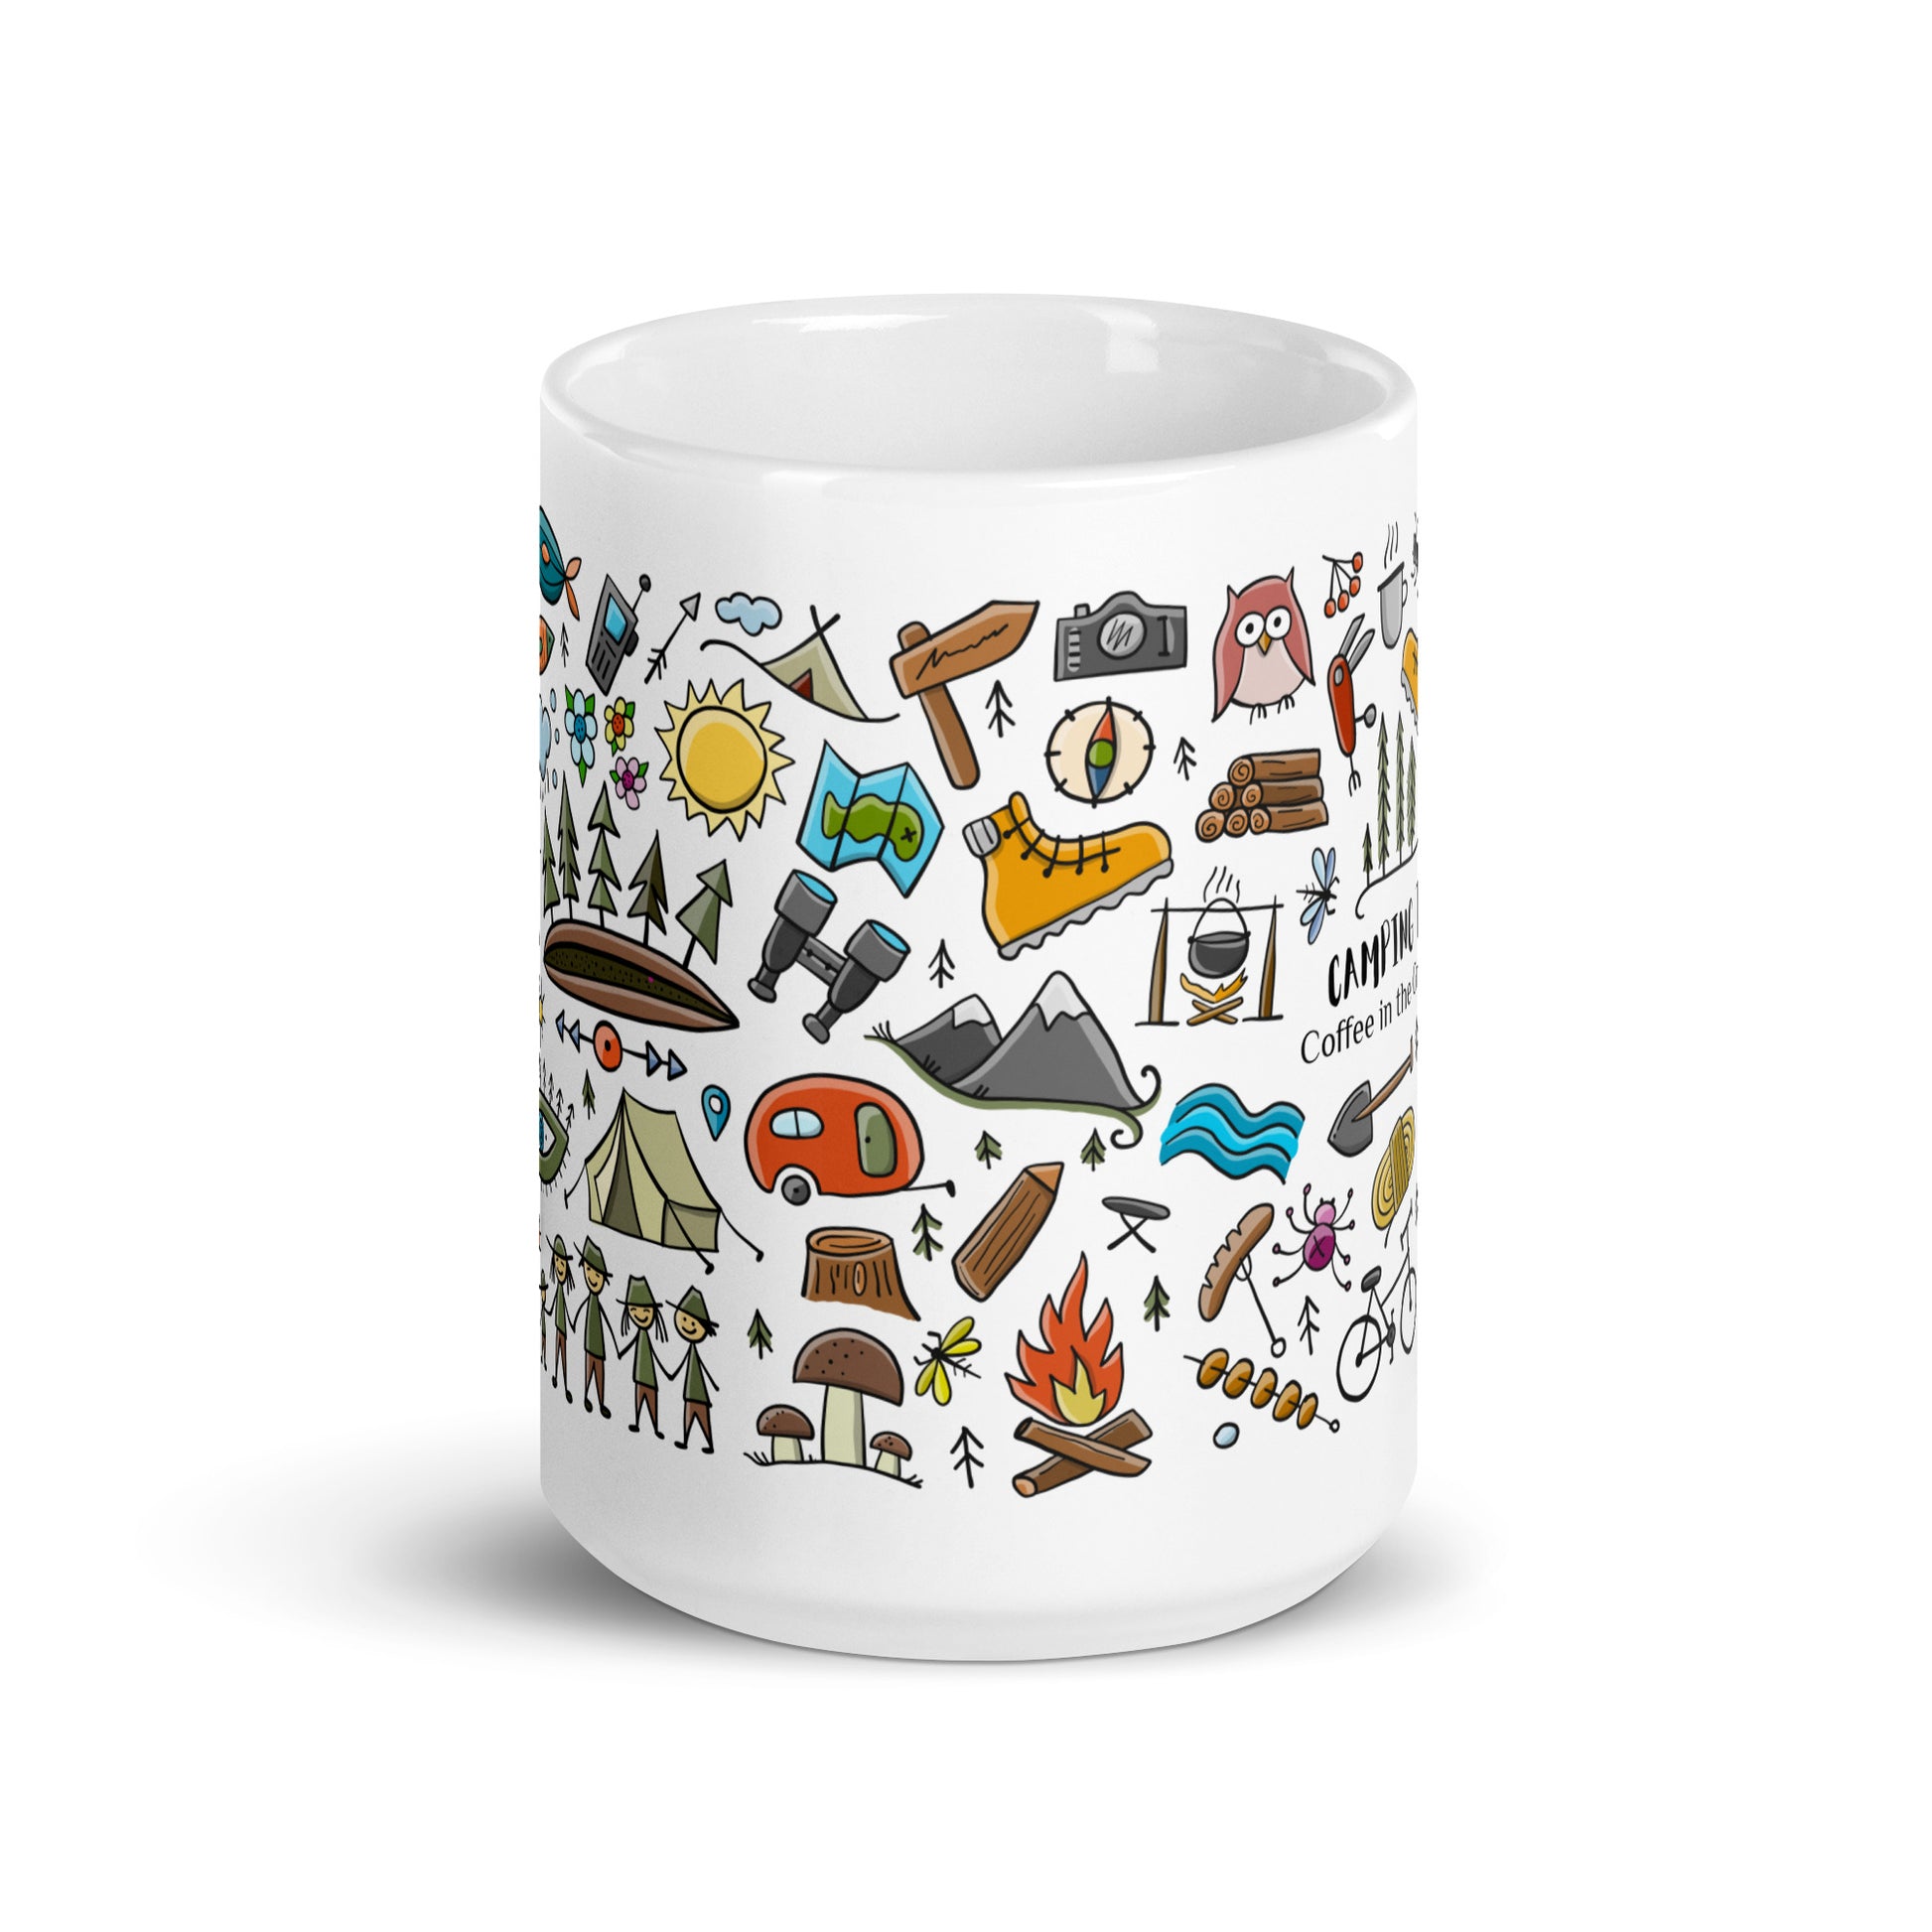 15 oz gift ceramic mug for camping and nature lovers. Basic text on mug: Camping therapy. Coffee in the Great Outdoors. The main text on the mug can be replaced for your own.